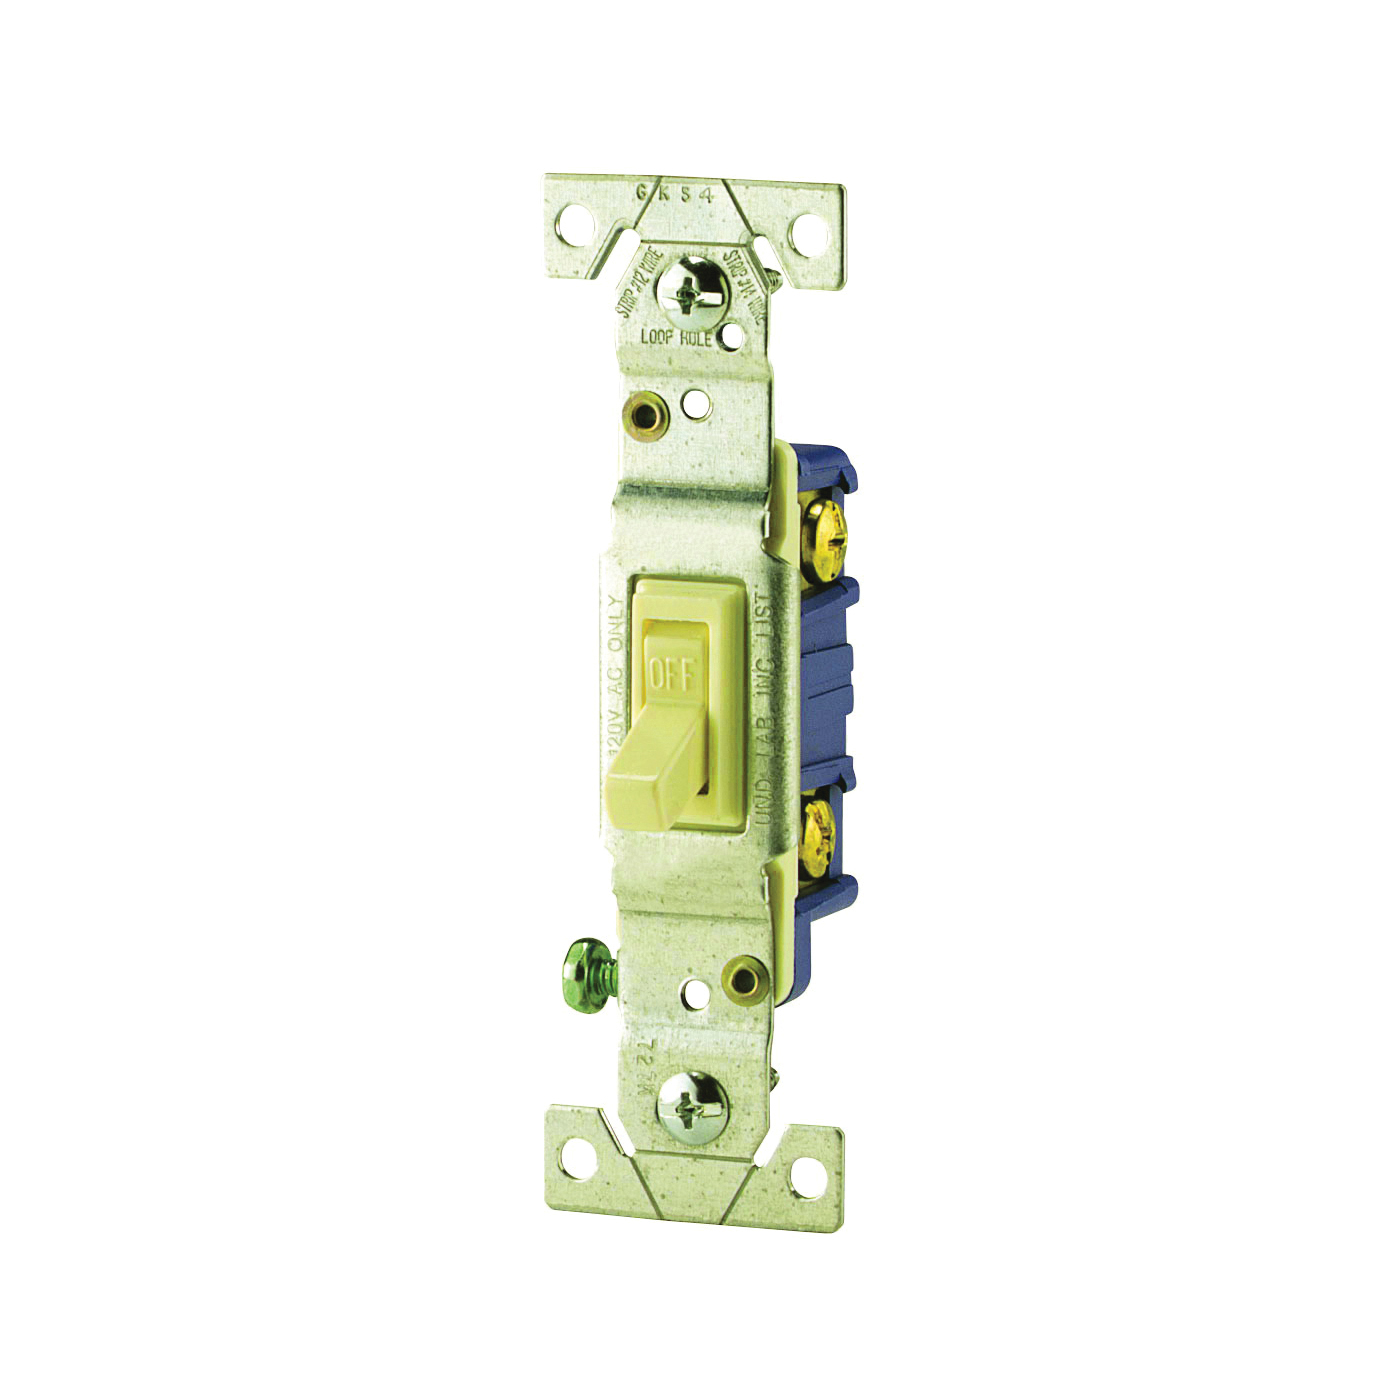 C1301-7V Toggle Switch, 15 A, 120 V, Push-In Terminal, 5-20R, Polycarbonate Housing Material